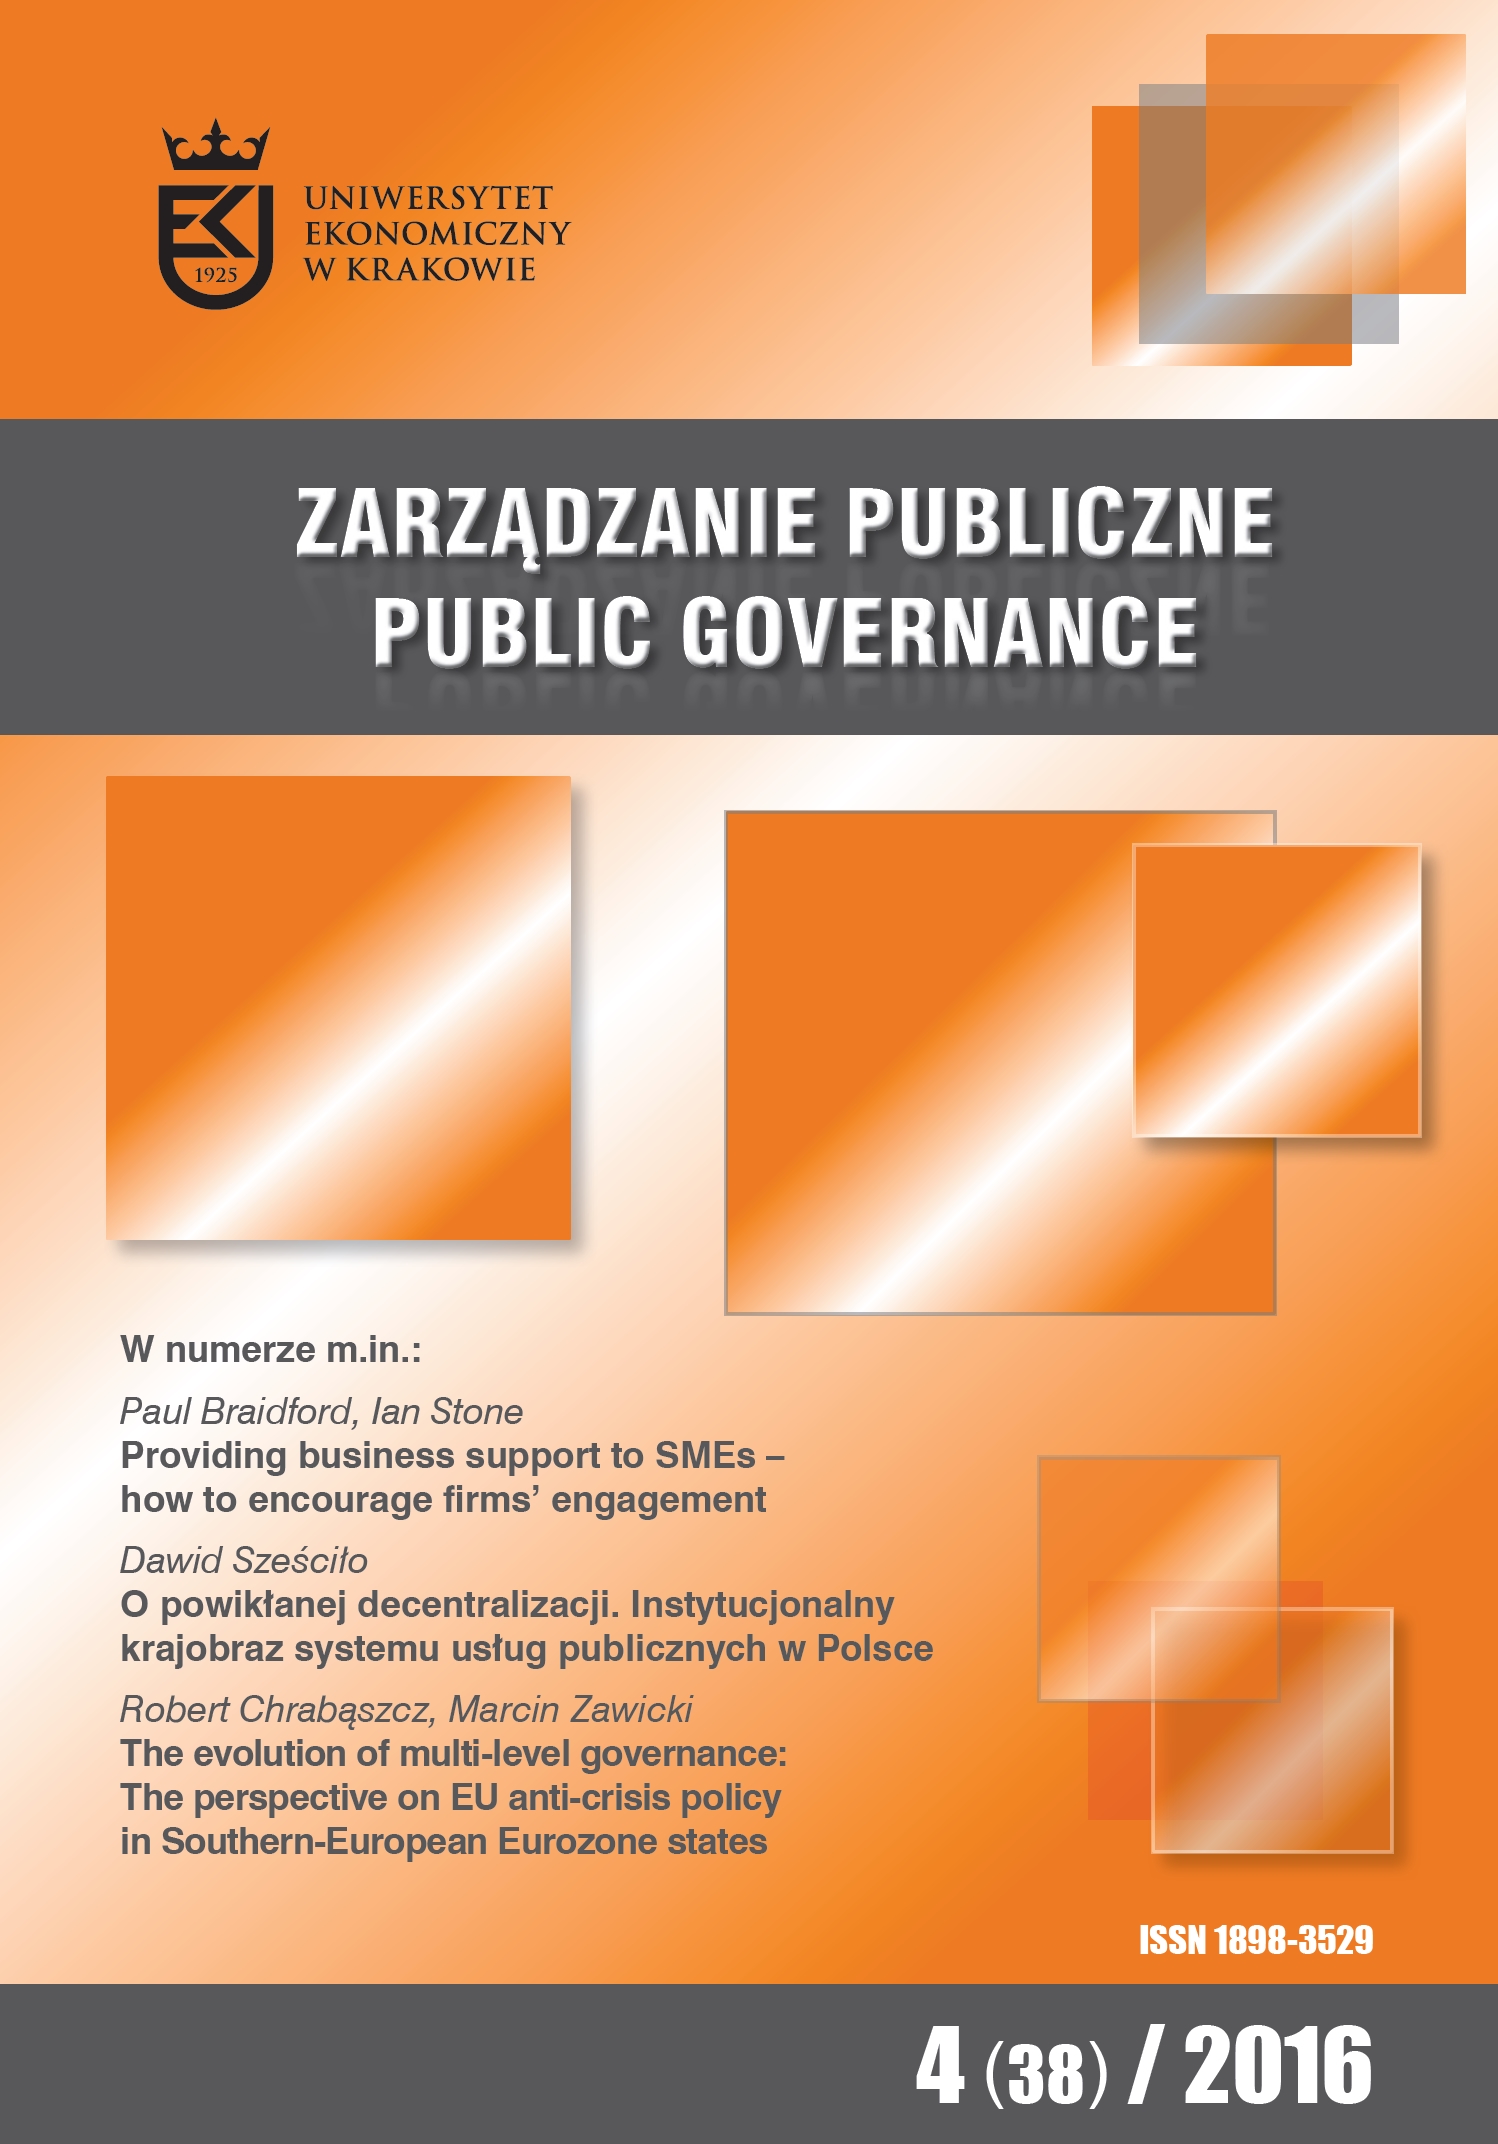 THE OPERATION OF THE KOŁOBRZEG SEAPORT ON THE BASIS OF A PUBLIC SUPERVISION SYSTEM Cover Image